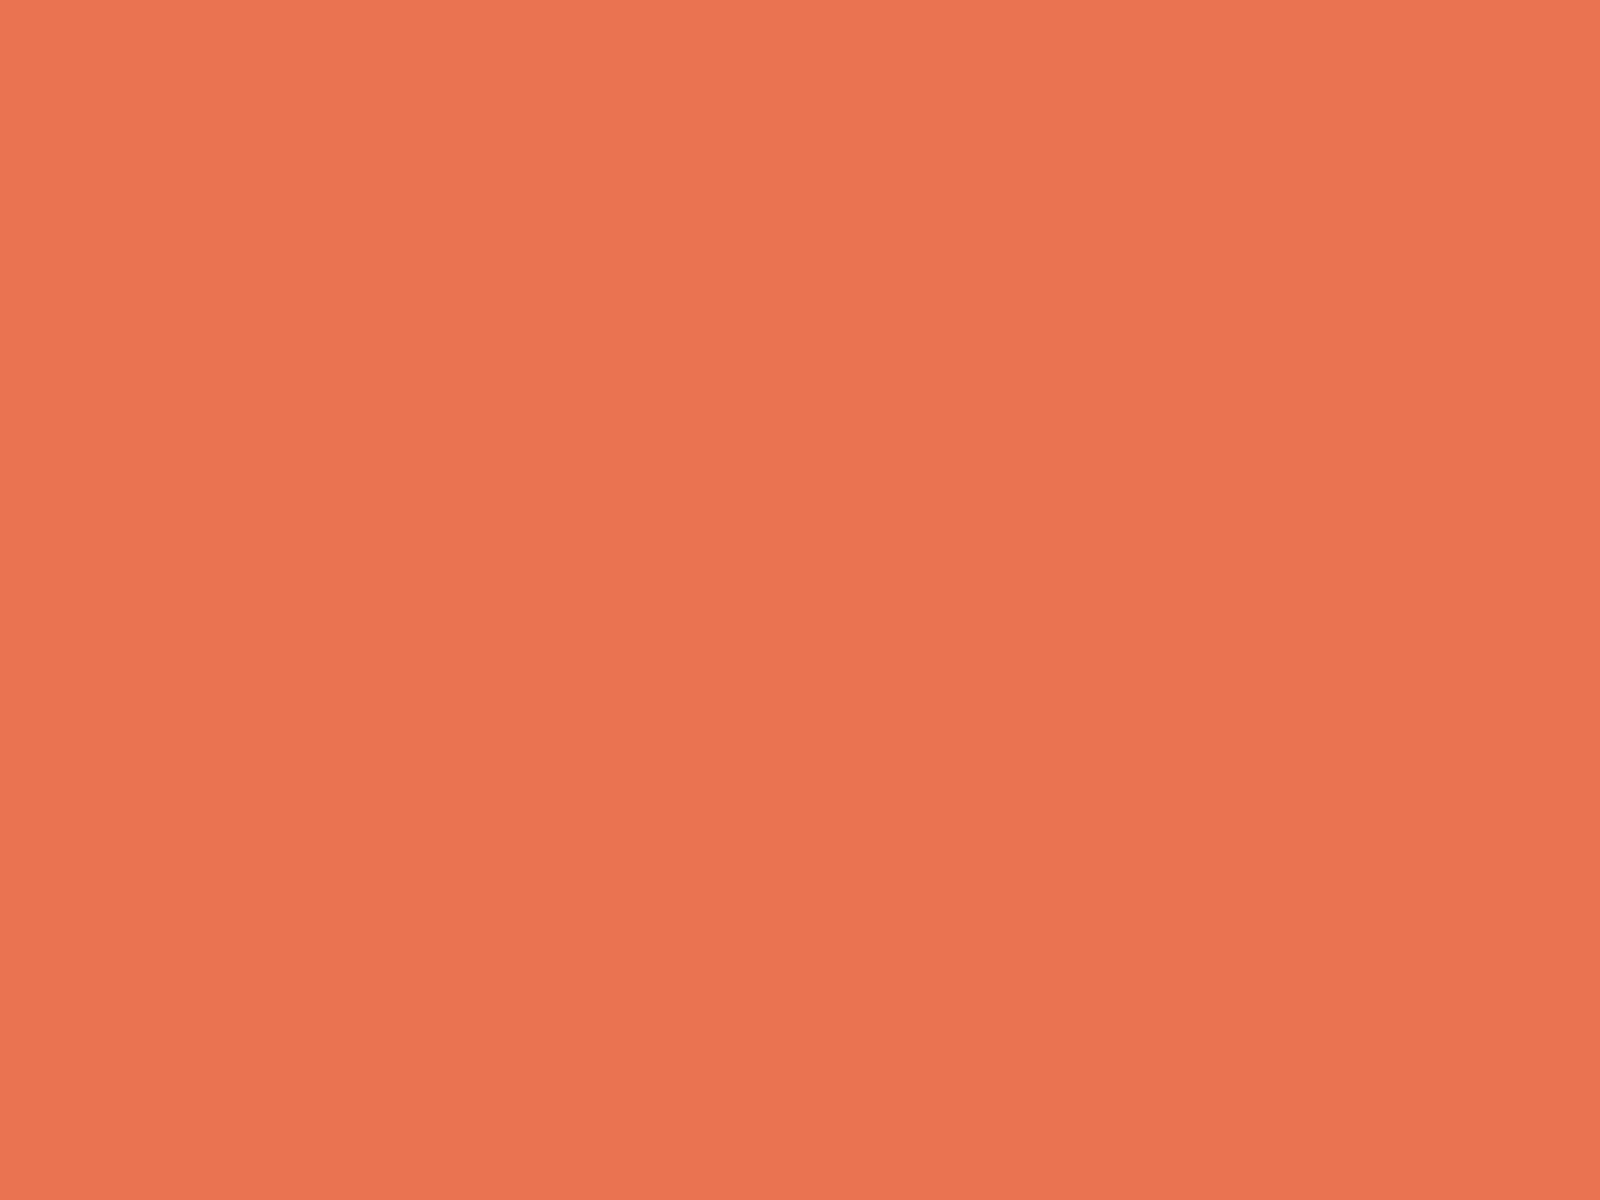 1600x1200 Light Red Ochre Solid Color Background